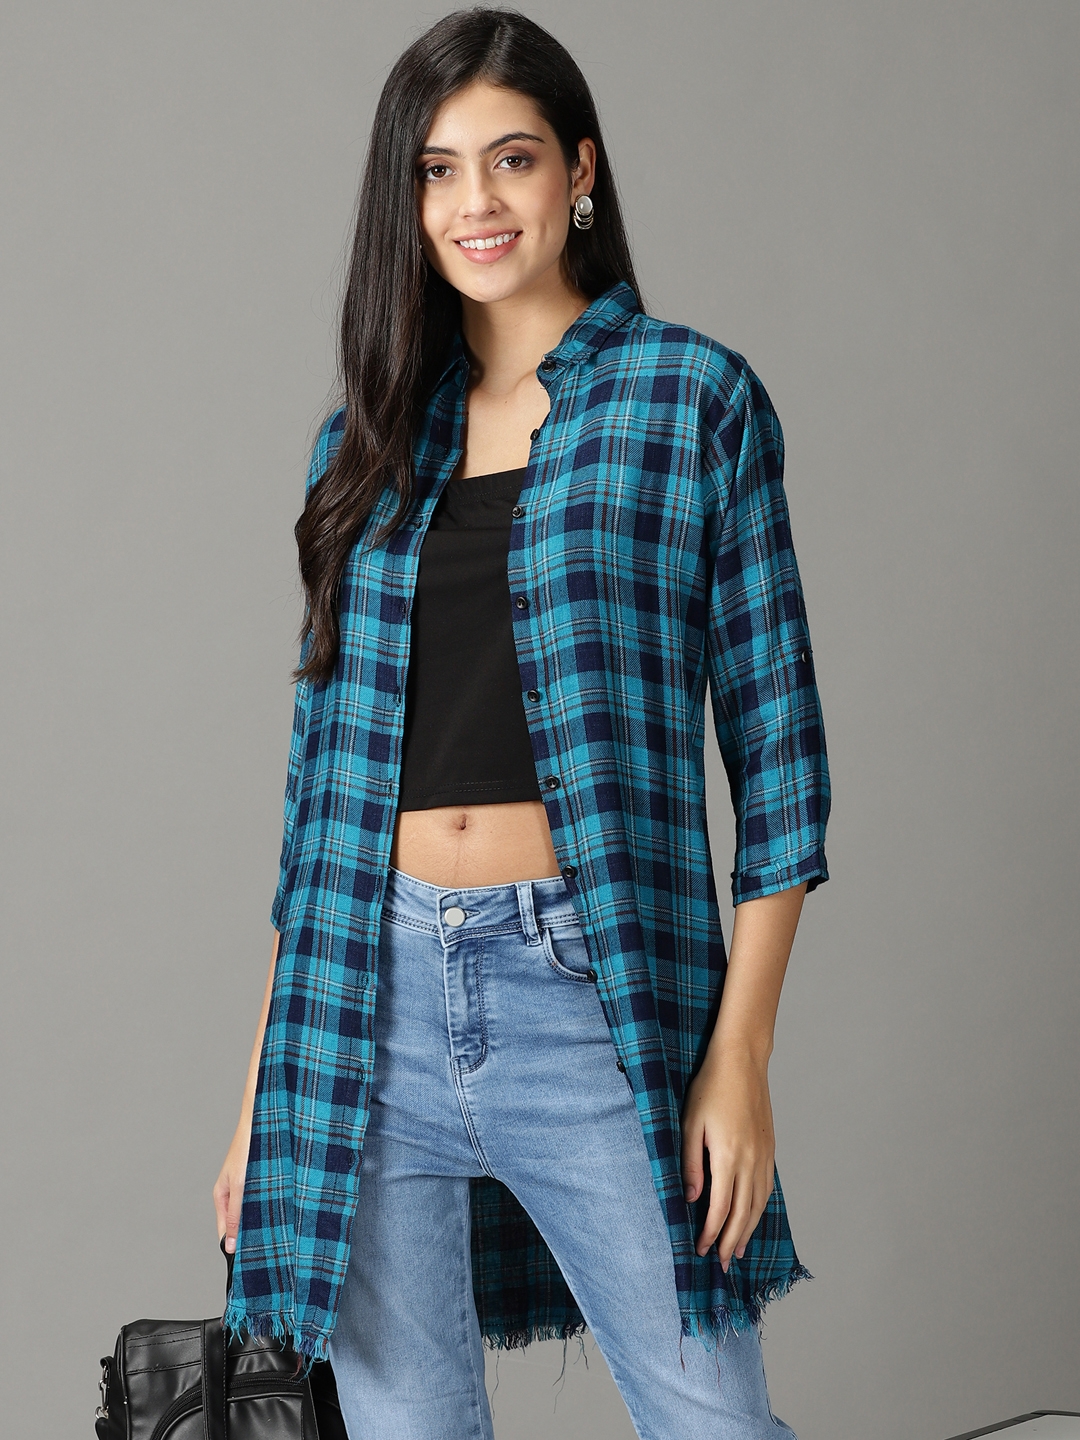 SHOWOFF Women's Spread Collar Teal Checked Shirt